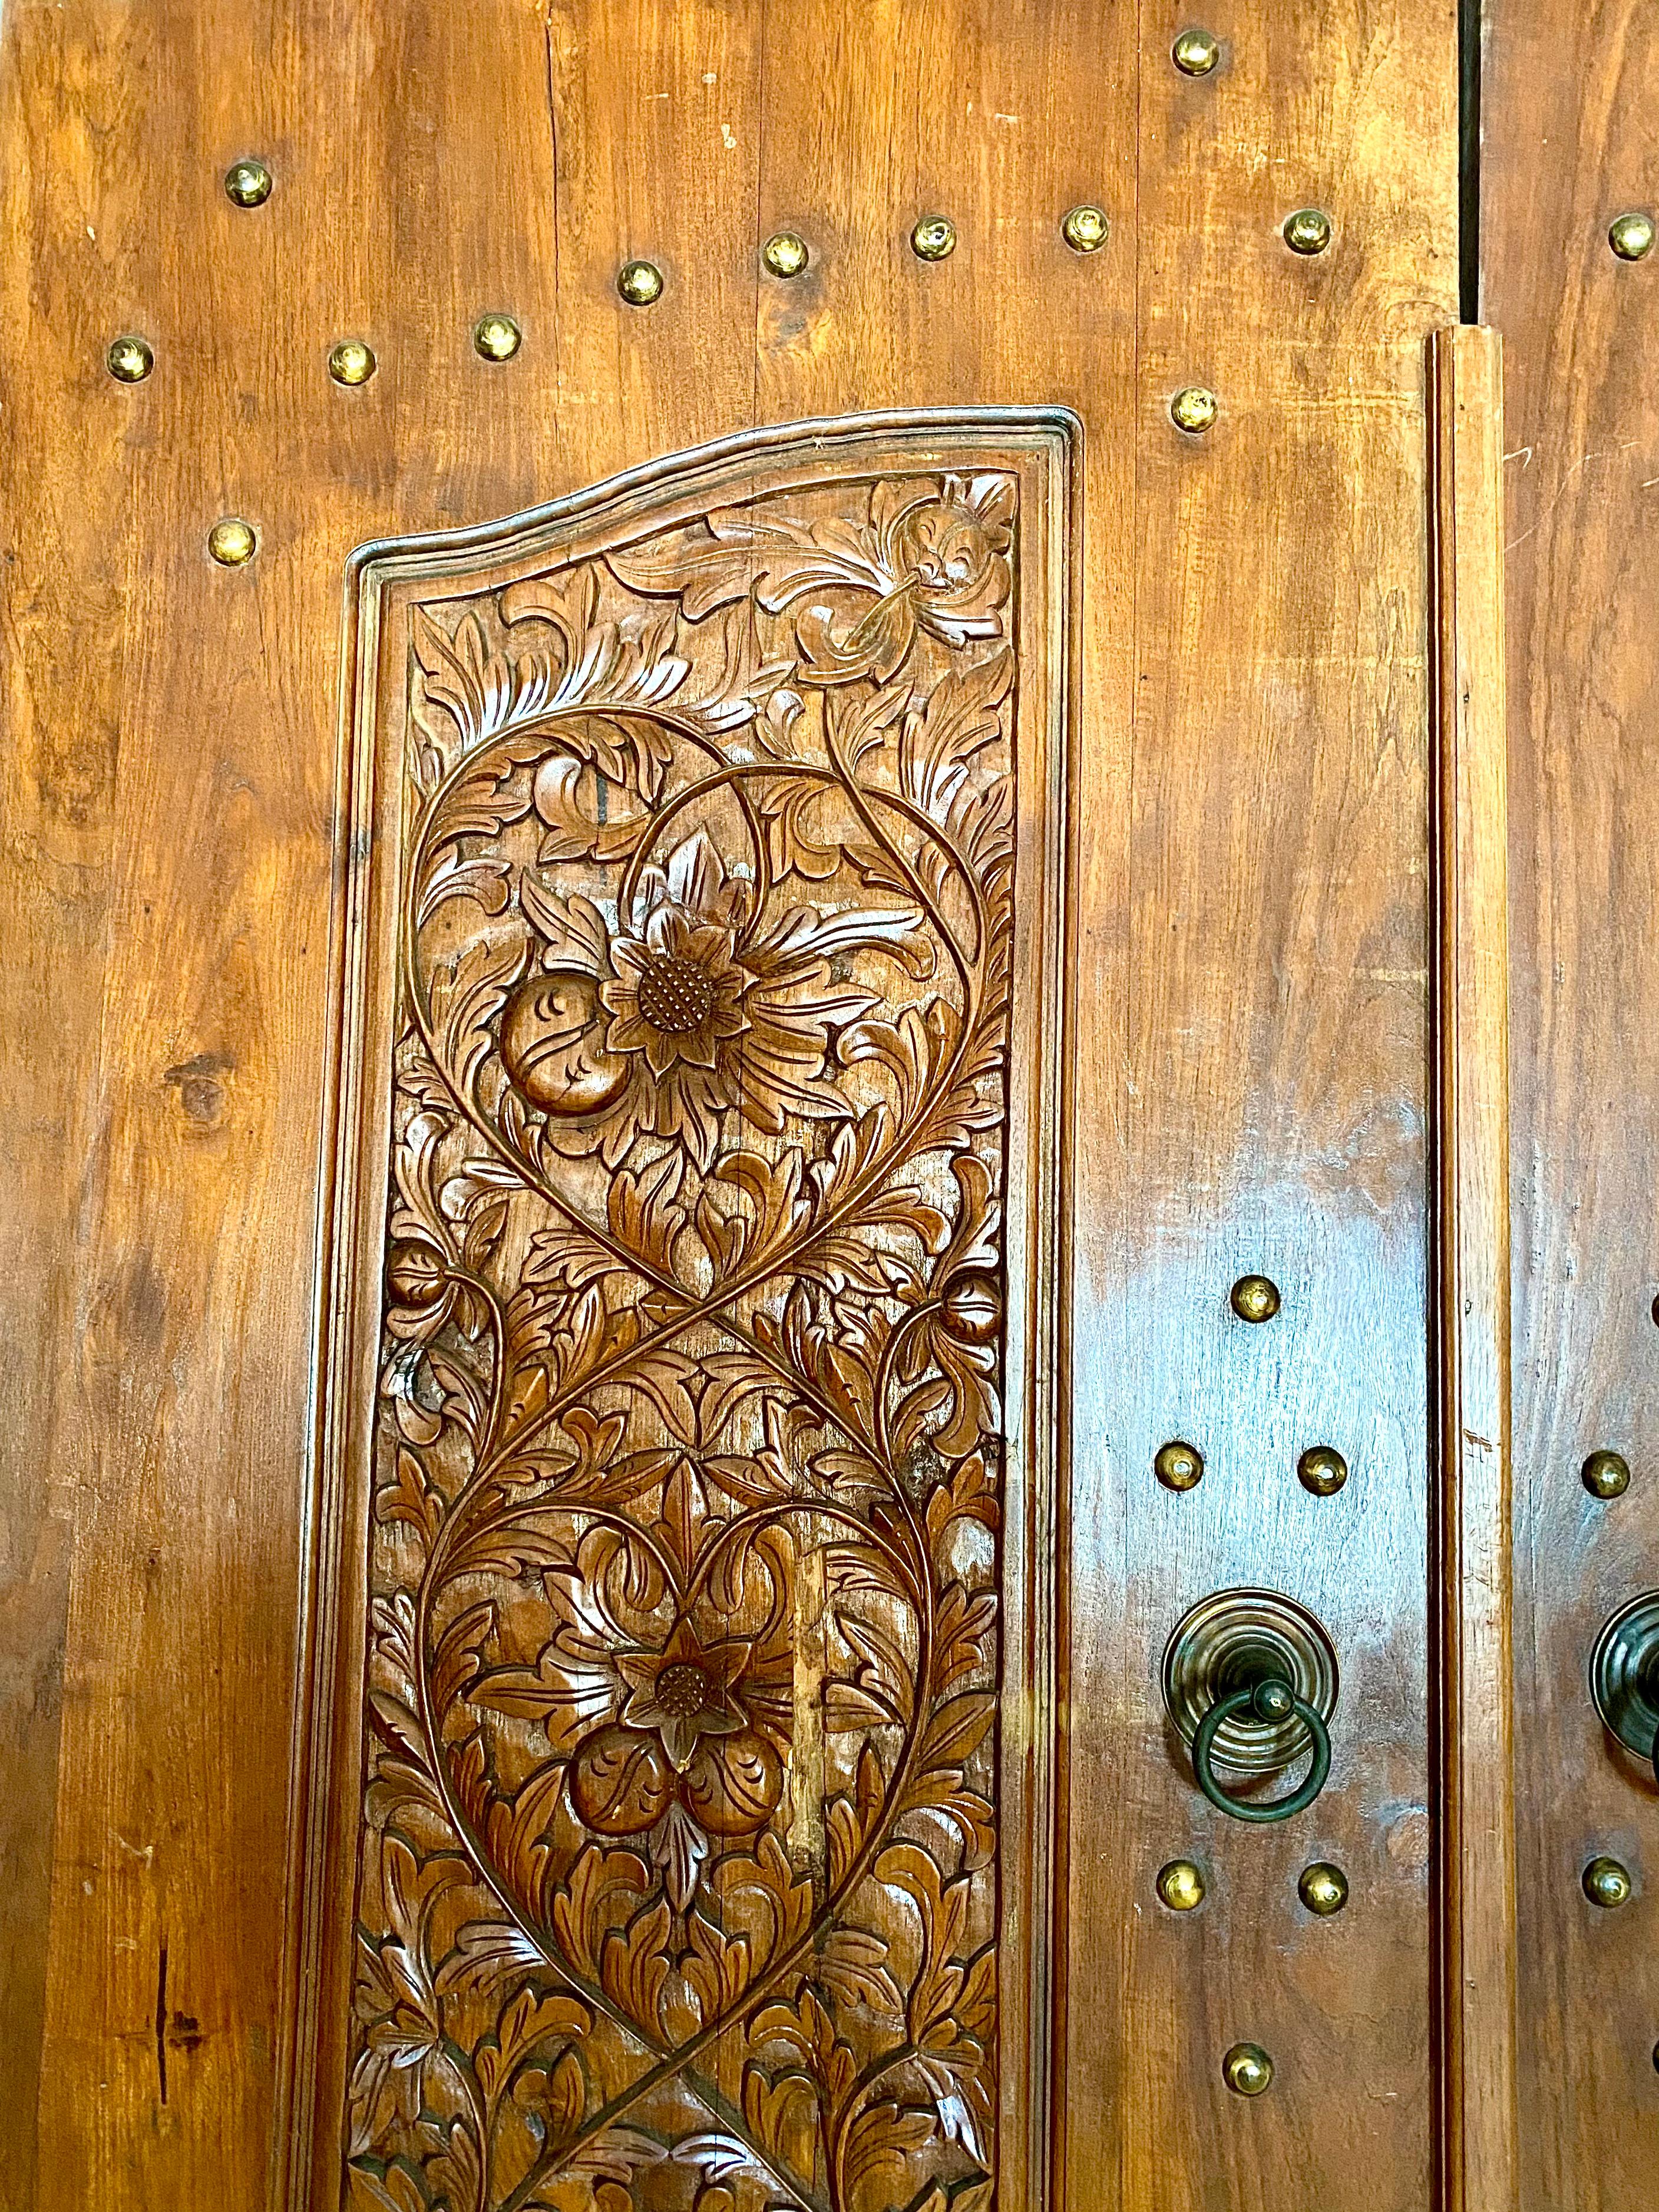 This was an entry door to the lavish home in Indonesia. It is Ideal for the entrance door to give a rustic look with a beautiful patina.

Measures: 98